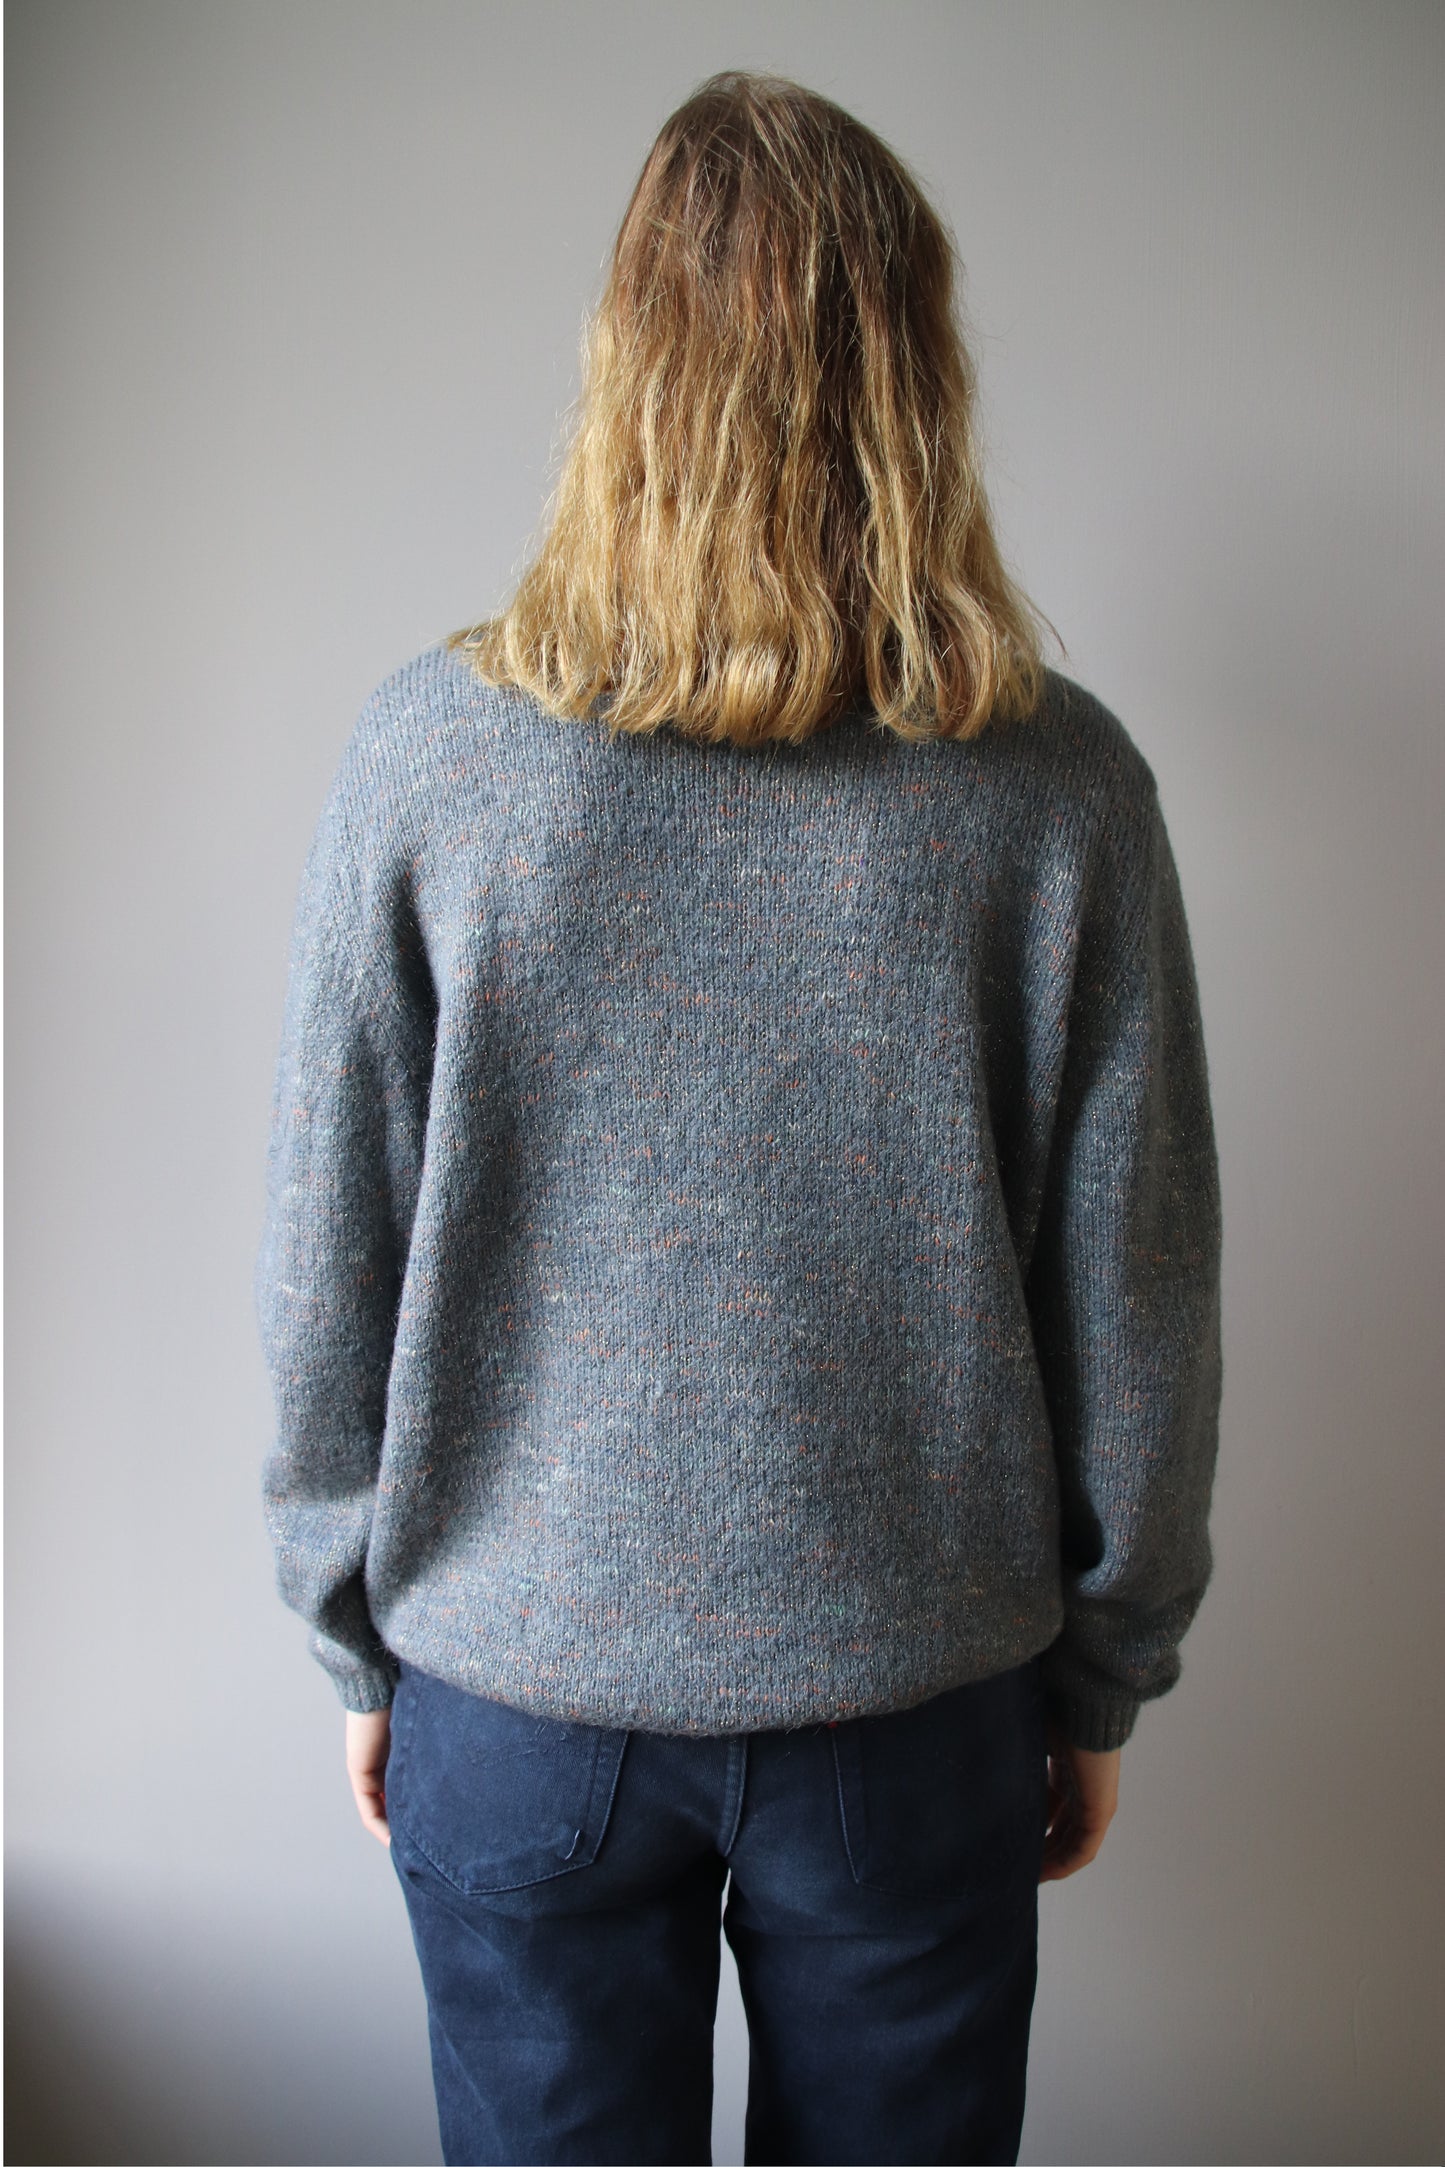 lucinda holiday sweater - M/L